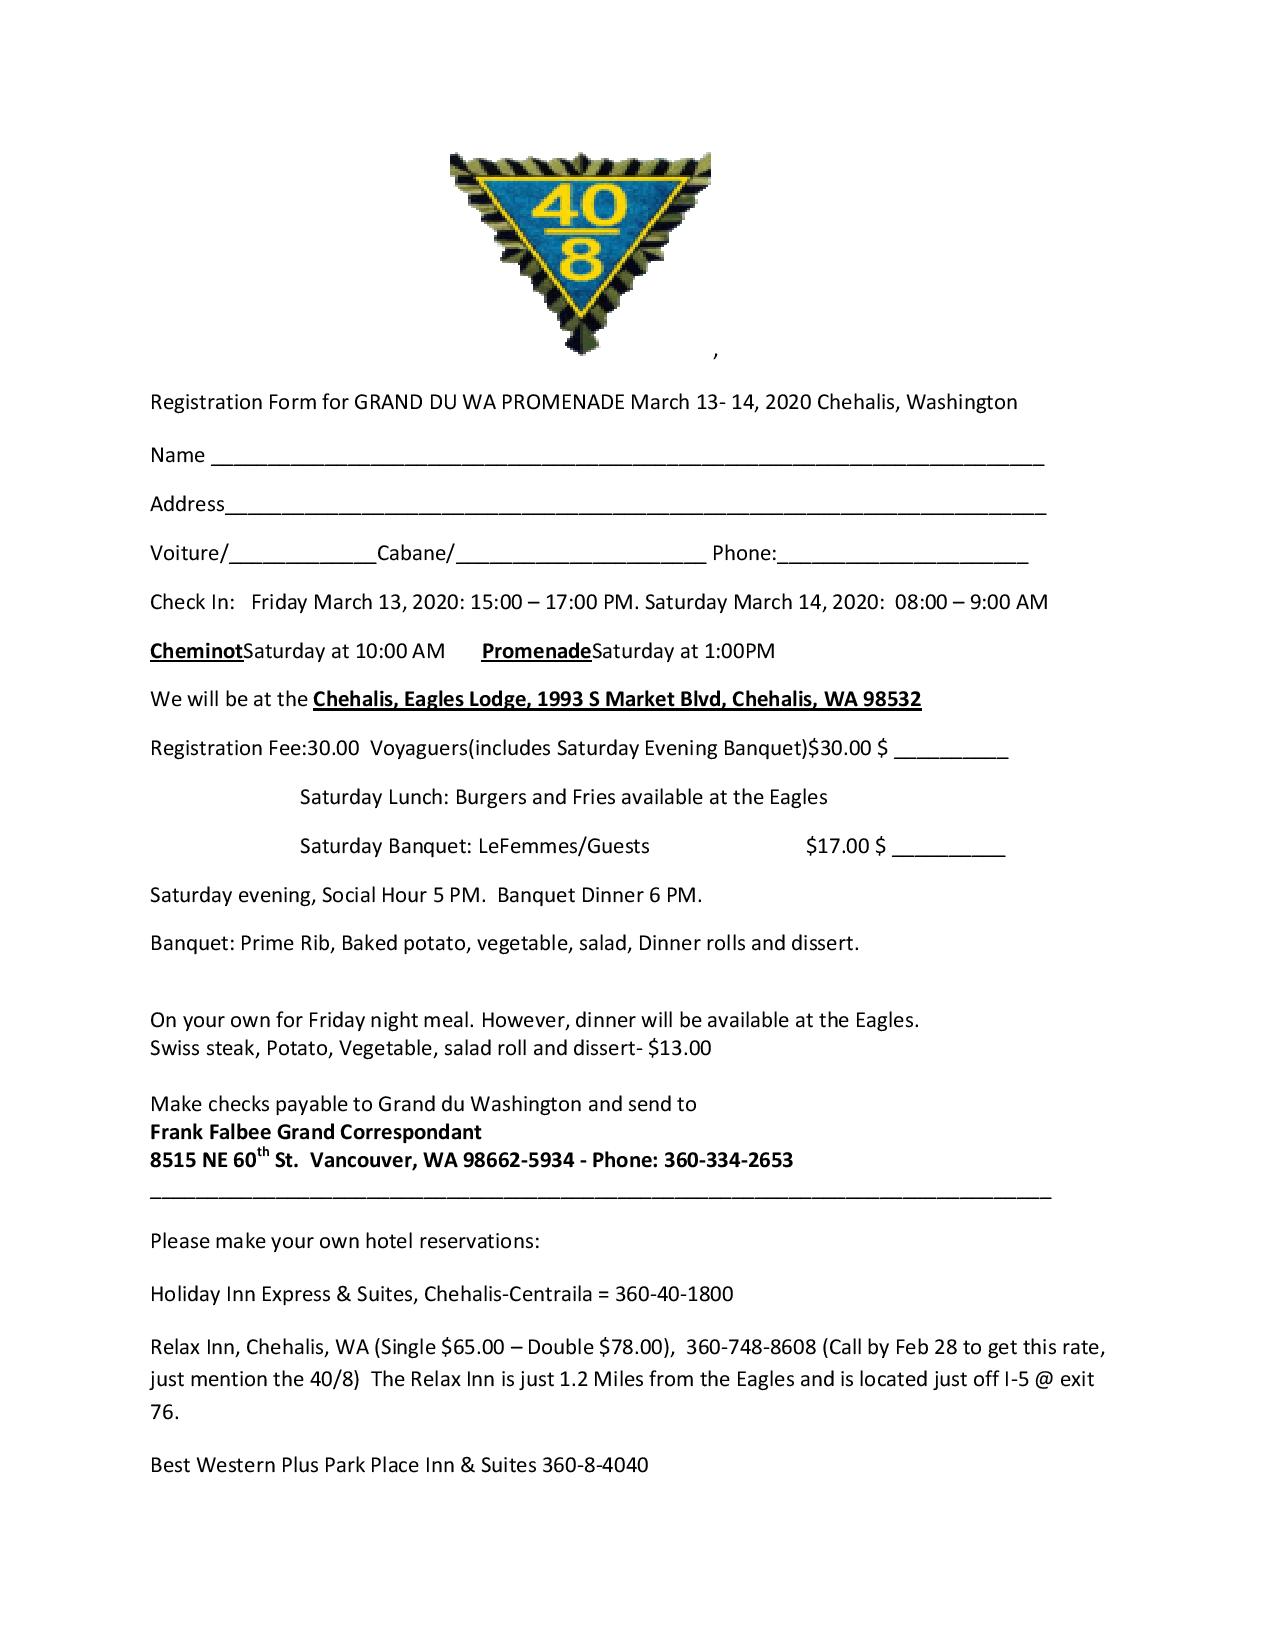 Reservation For Grand Prom Mar 13-14 2020-page-001